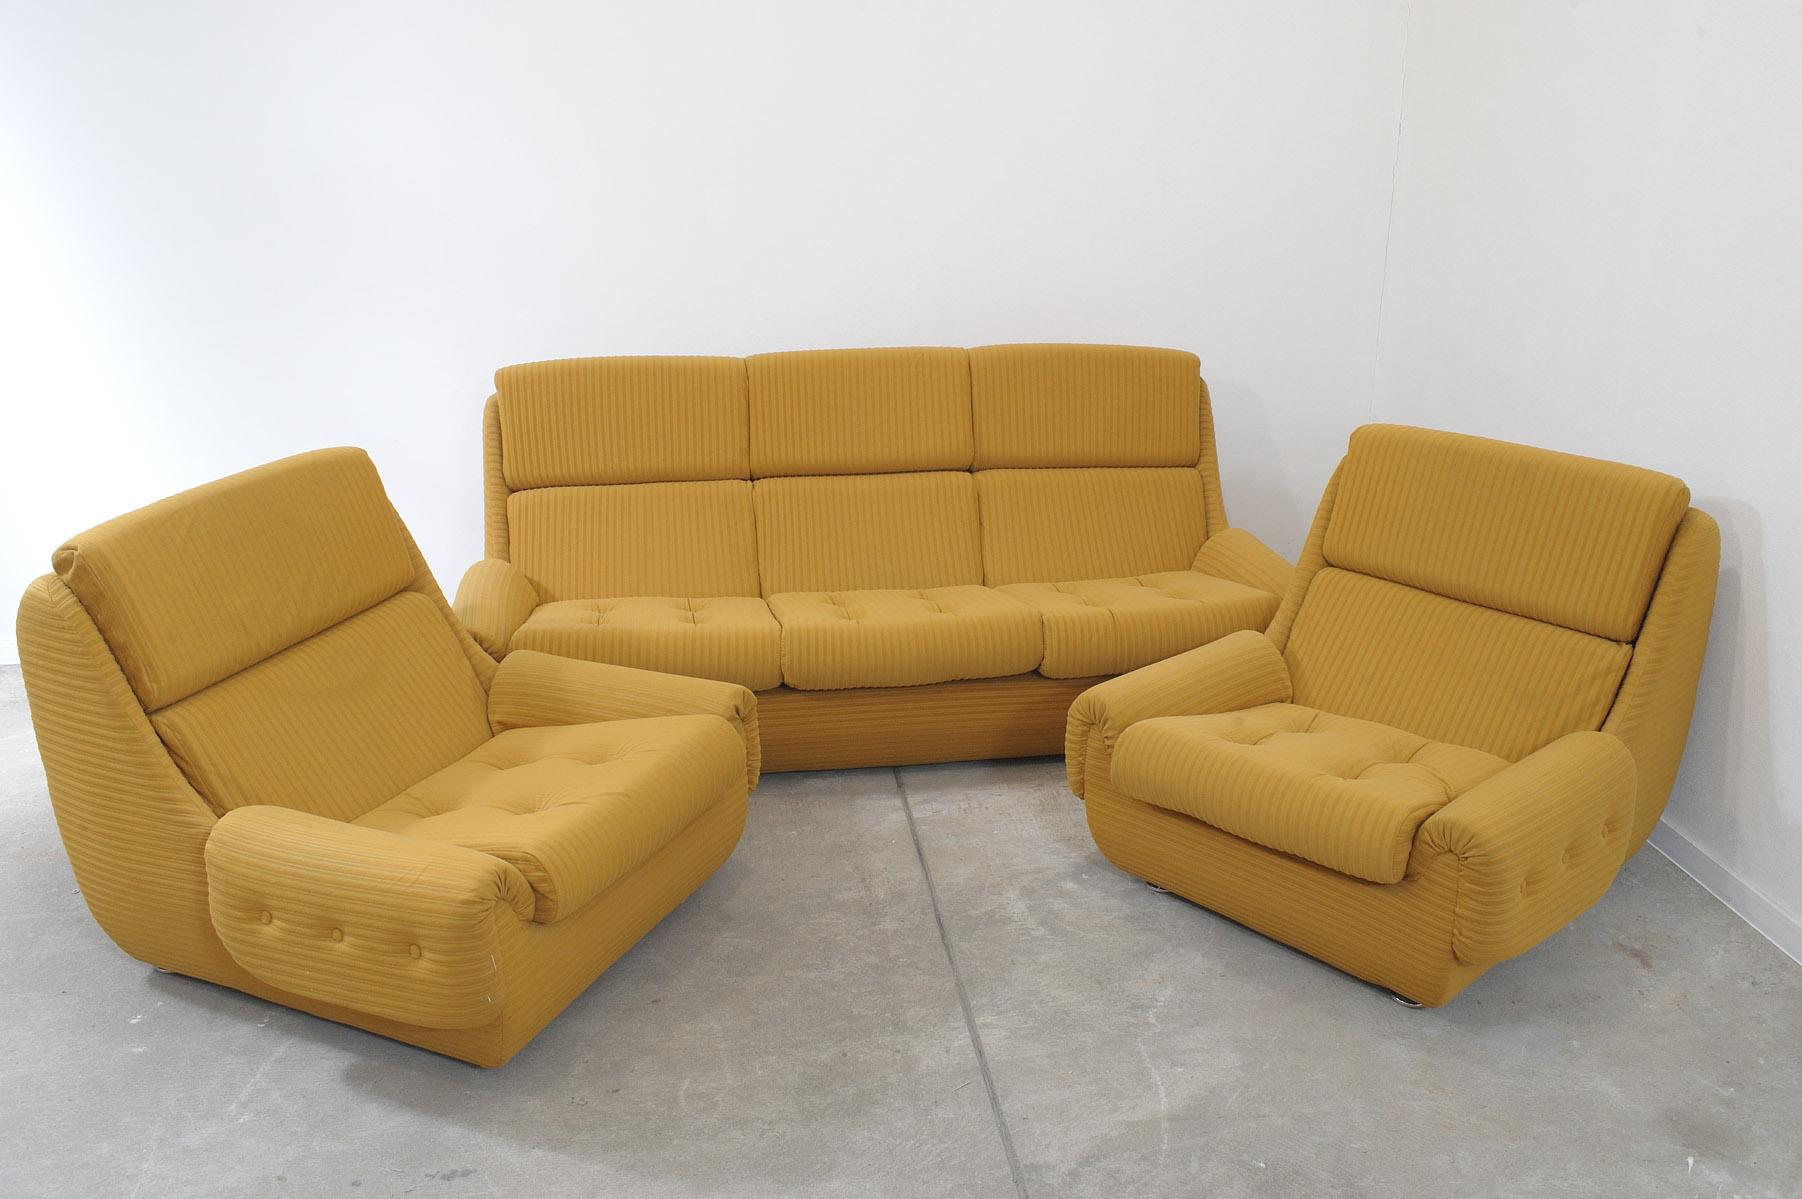 This vintage living room set is a typical example of furniture design of the 1970/1980´s in the former Czechoslovakia. It was made by JITONA company in 1977.

This living set was one of the most sought after in Czechoslovakia and was one of the few